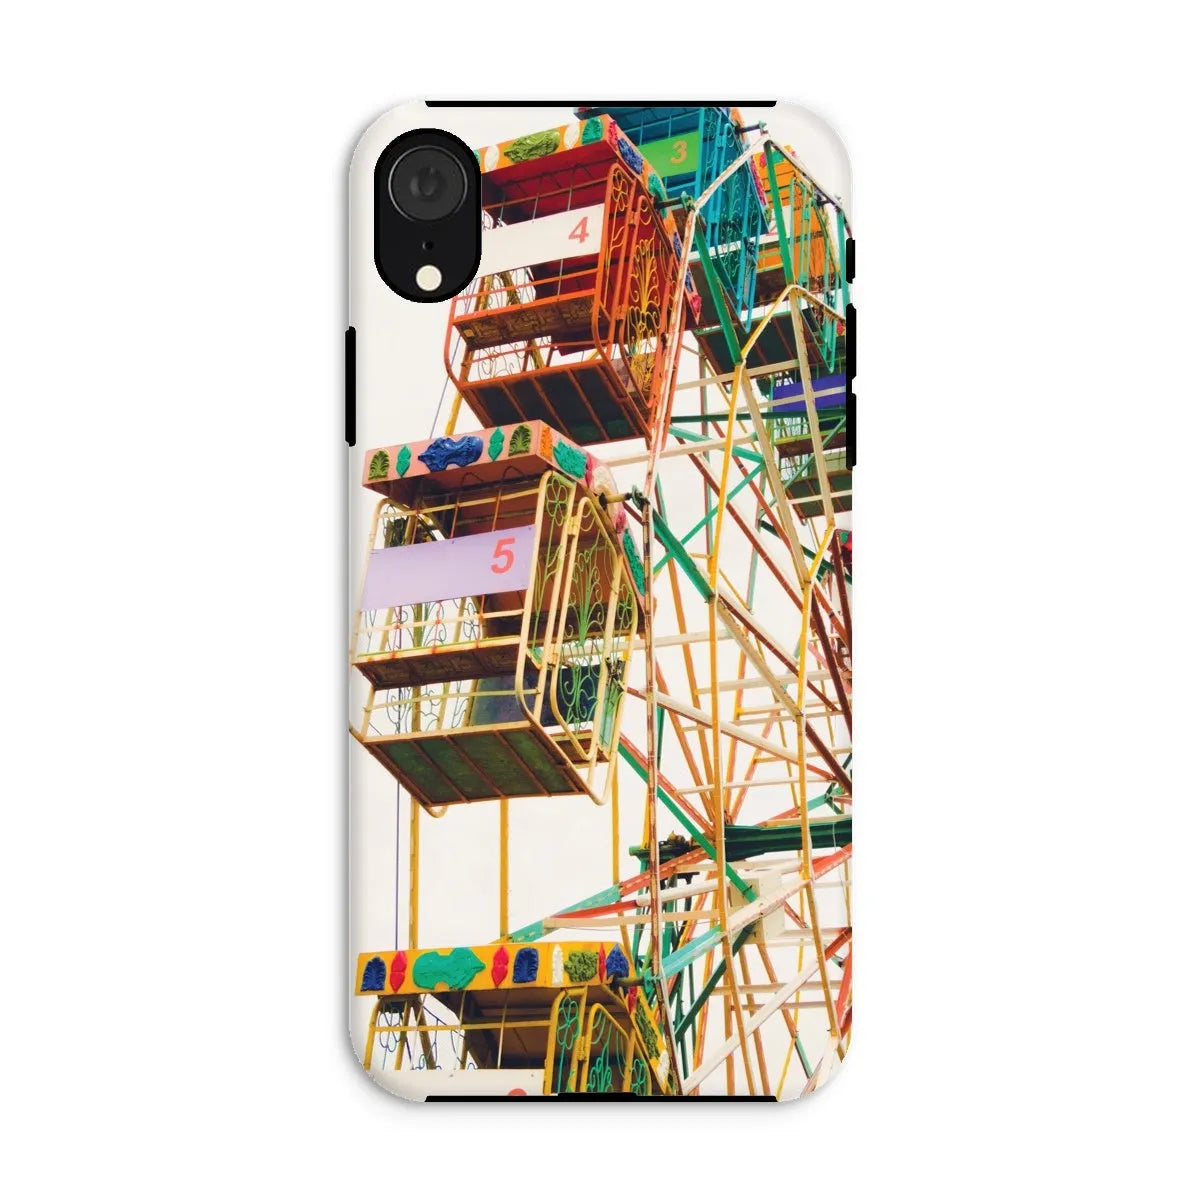 Wheel Of Fortune Tough Phone Case - Iphone Xr / Matte - Mobile Phone Cases - Aesthetic Art